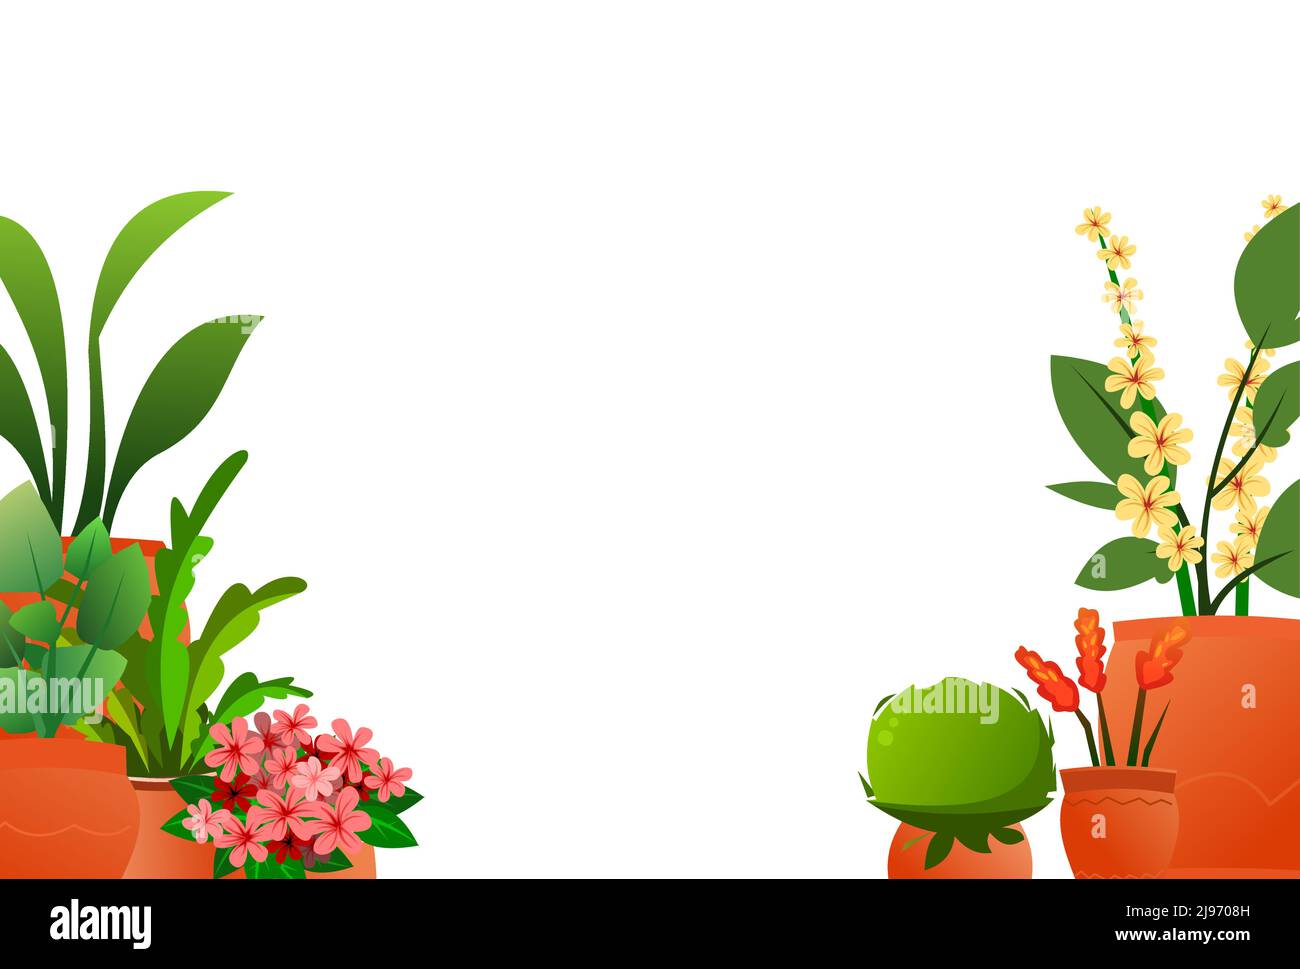 Indoor plants and flowers. In ceramic pots. Picture frame. Homemade beautiful herbs. Isolated on white background. Cartoon fun style. Vector Stock Vector